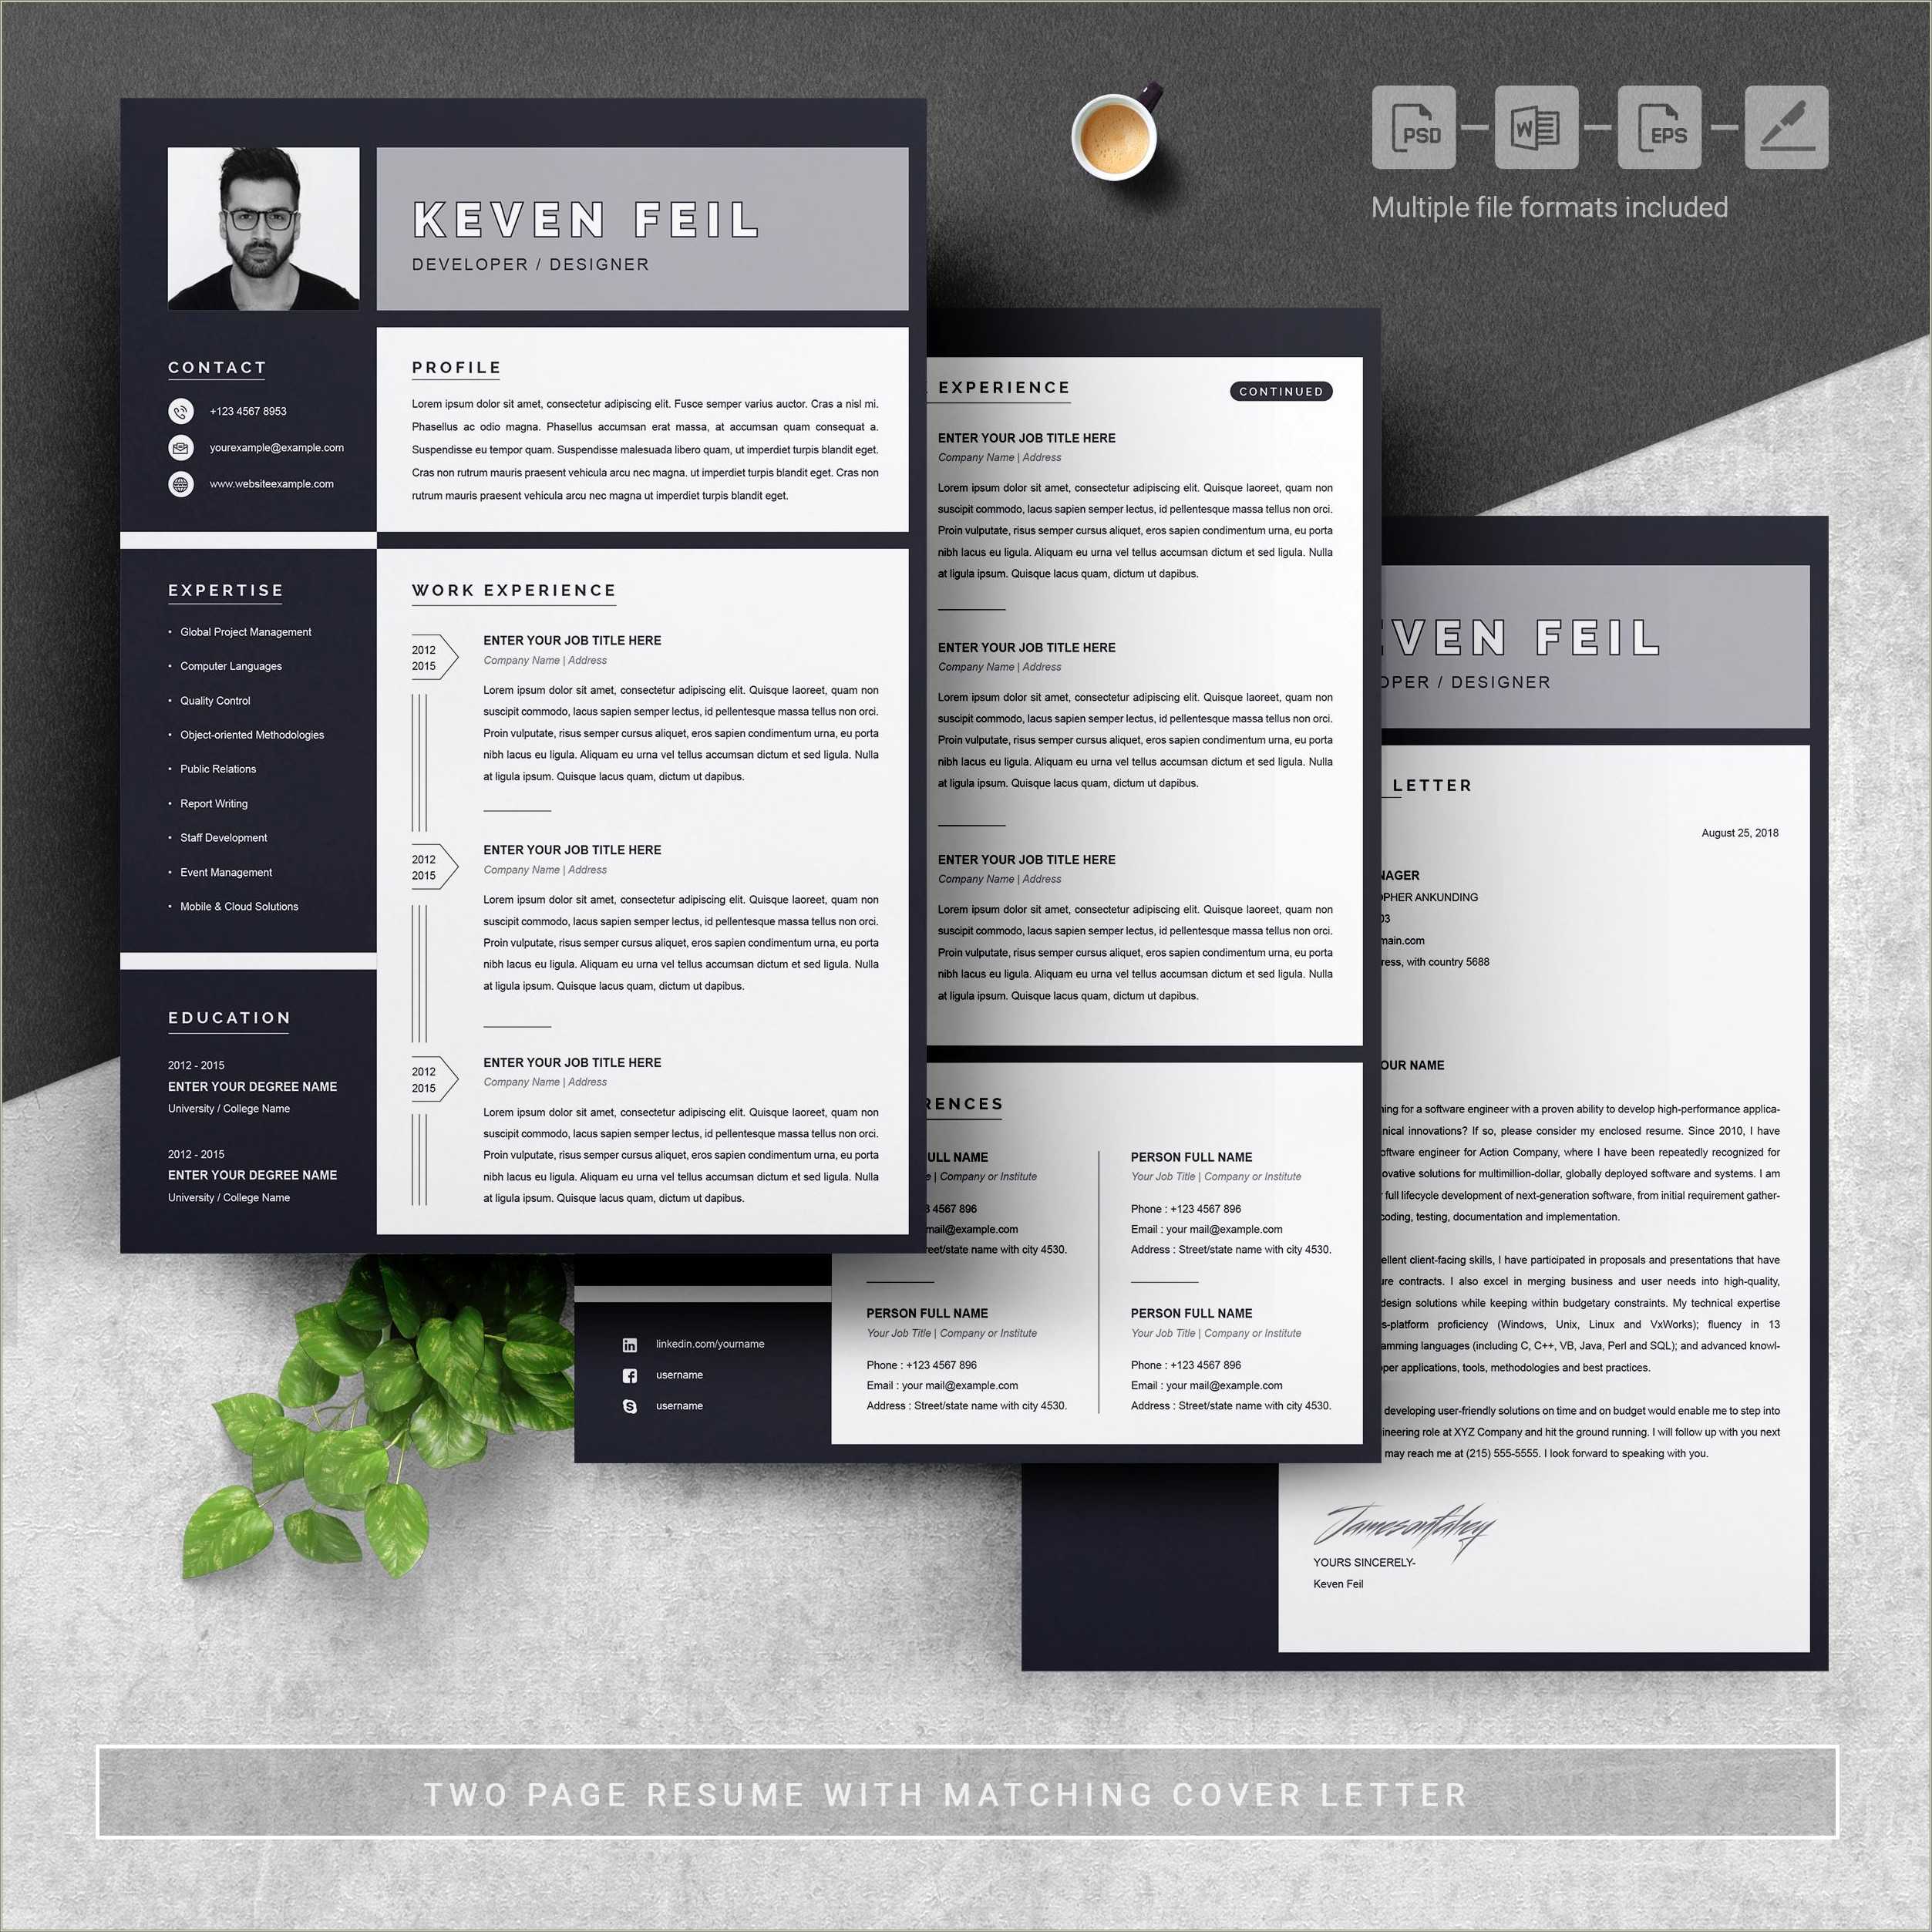 download-resume-templates-photoshop-free-resume-example-gallery